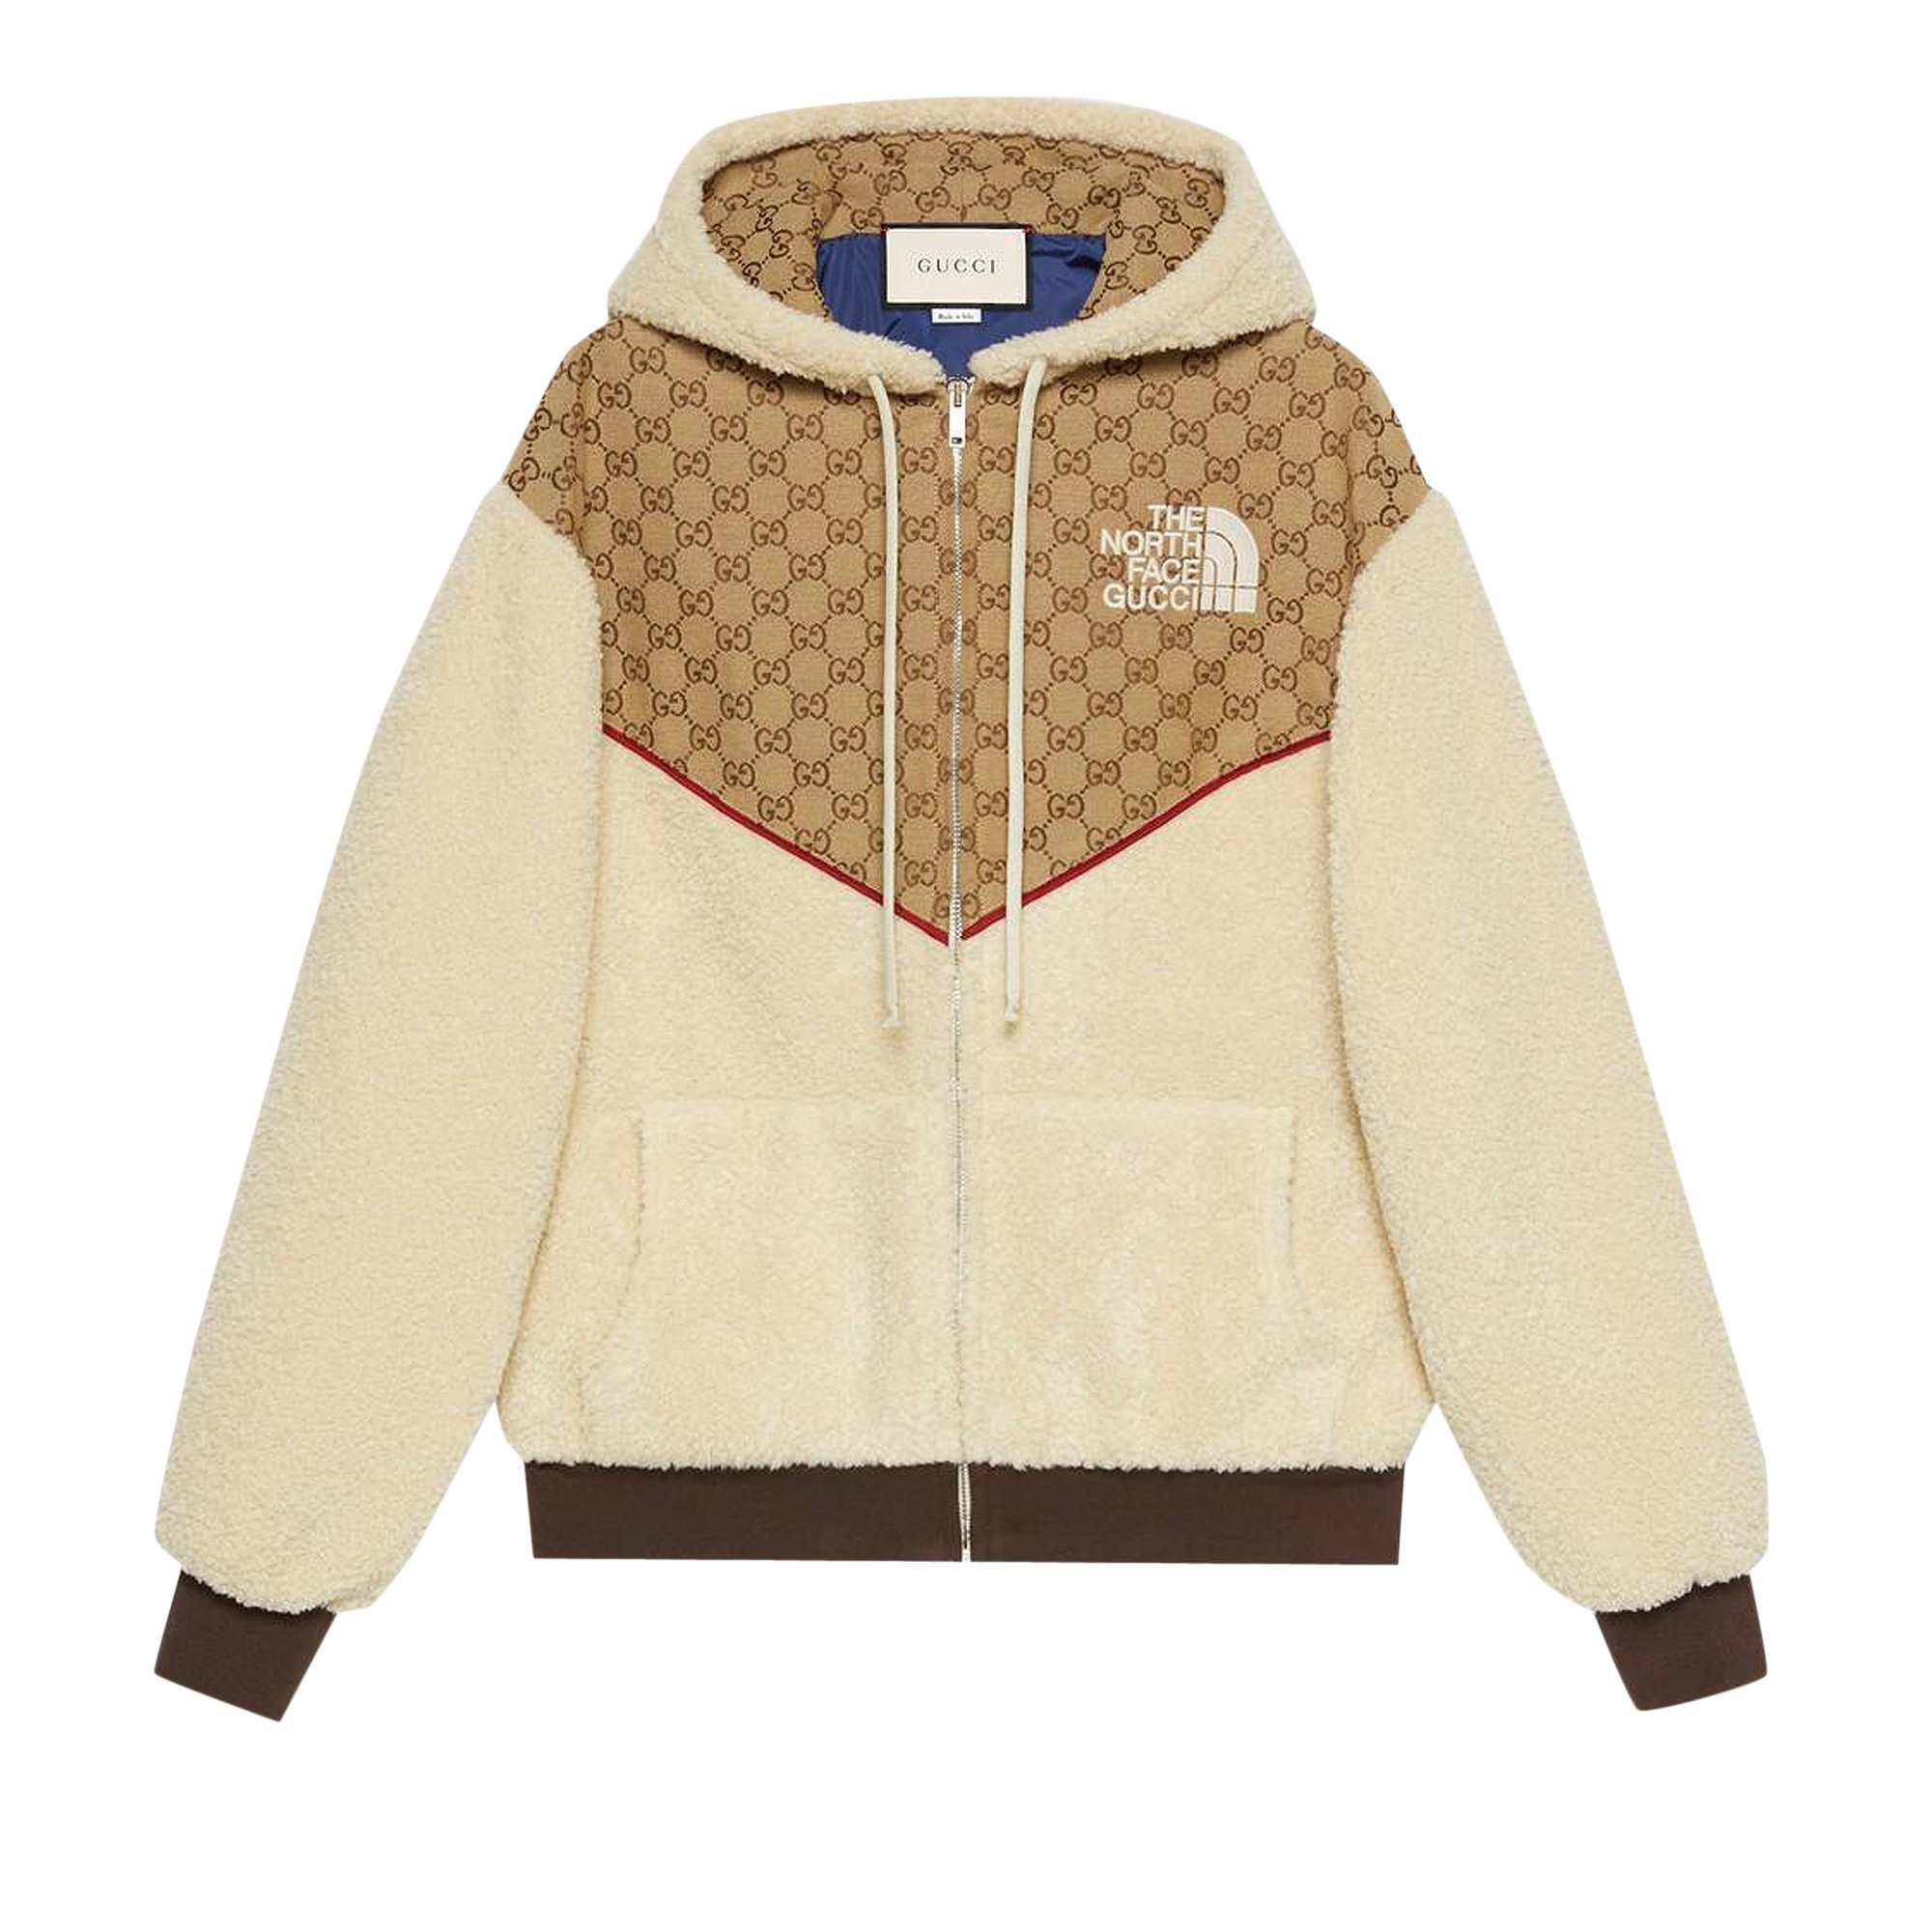 The North Face x Gucci GG Canvas Shearling Jacket 'Beige/Ebony'